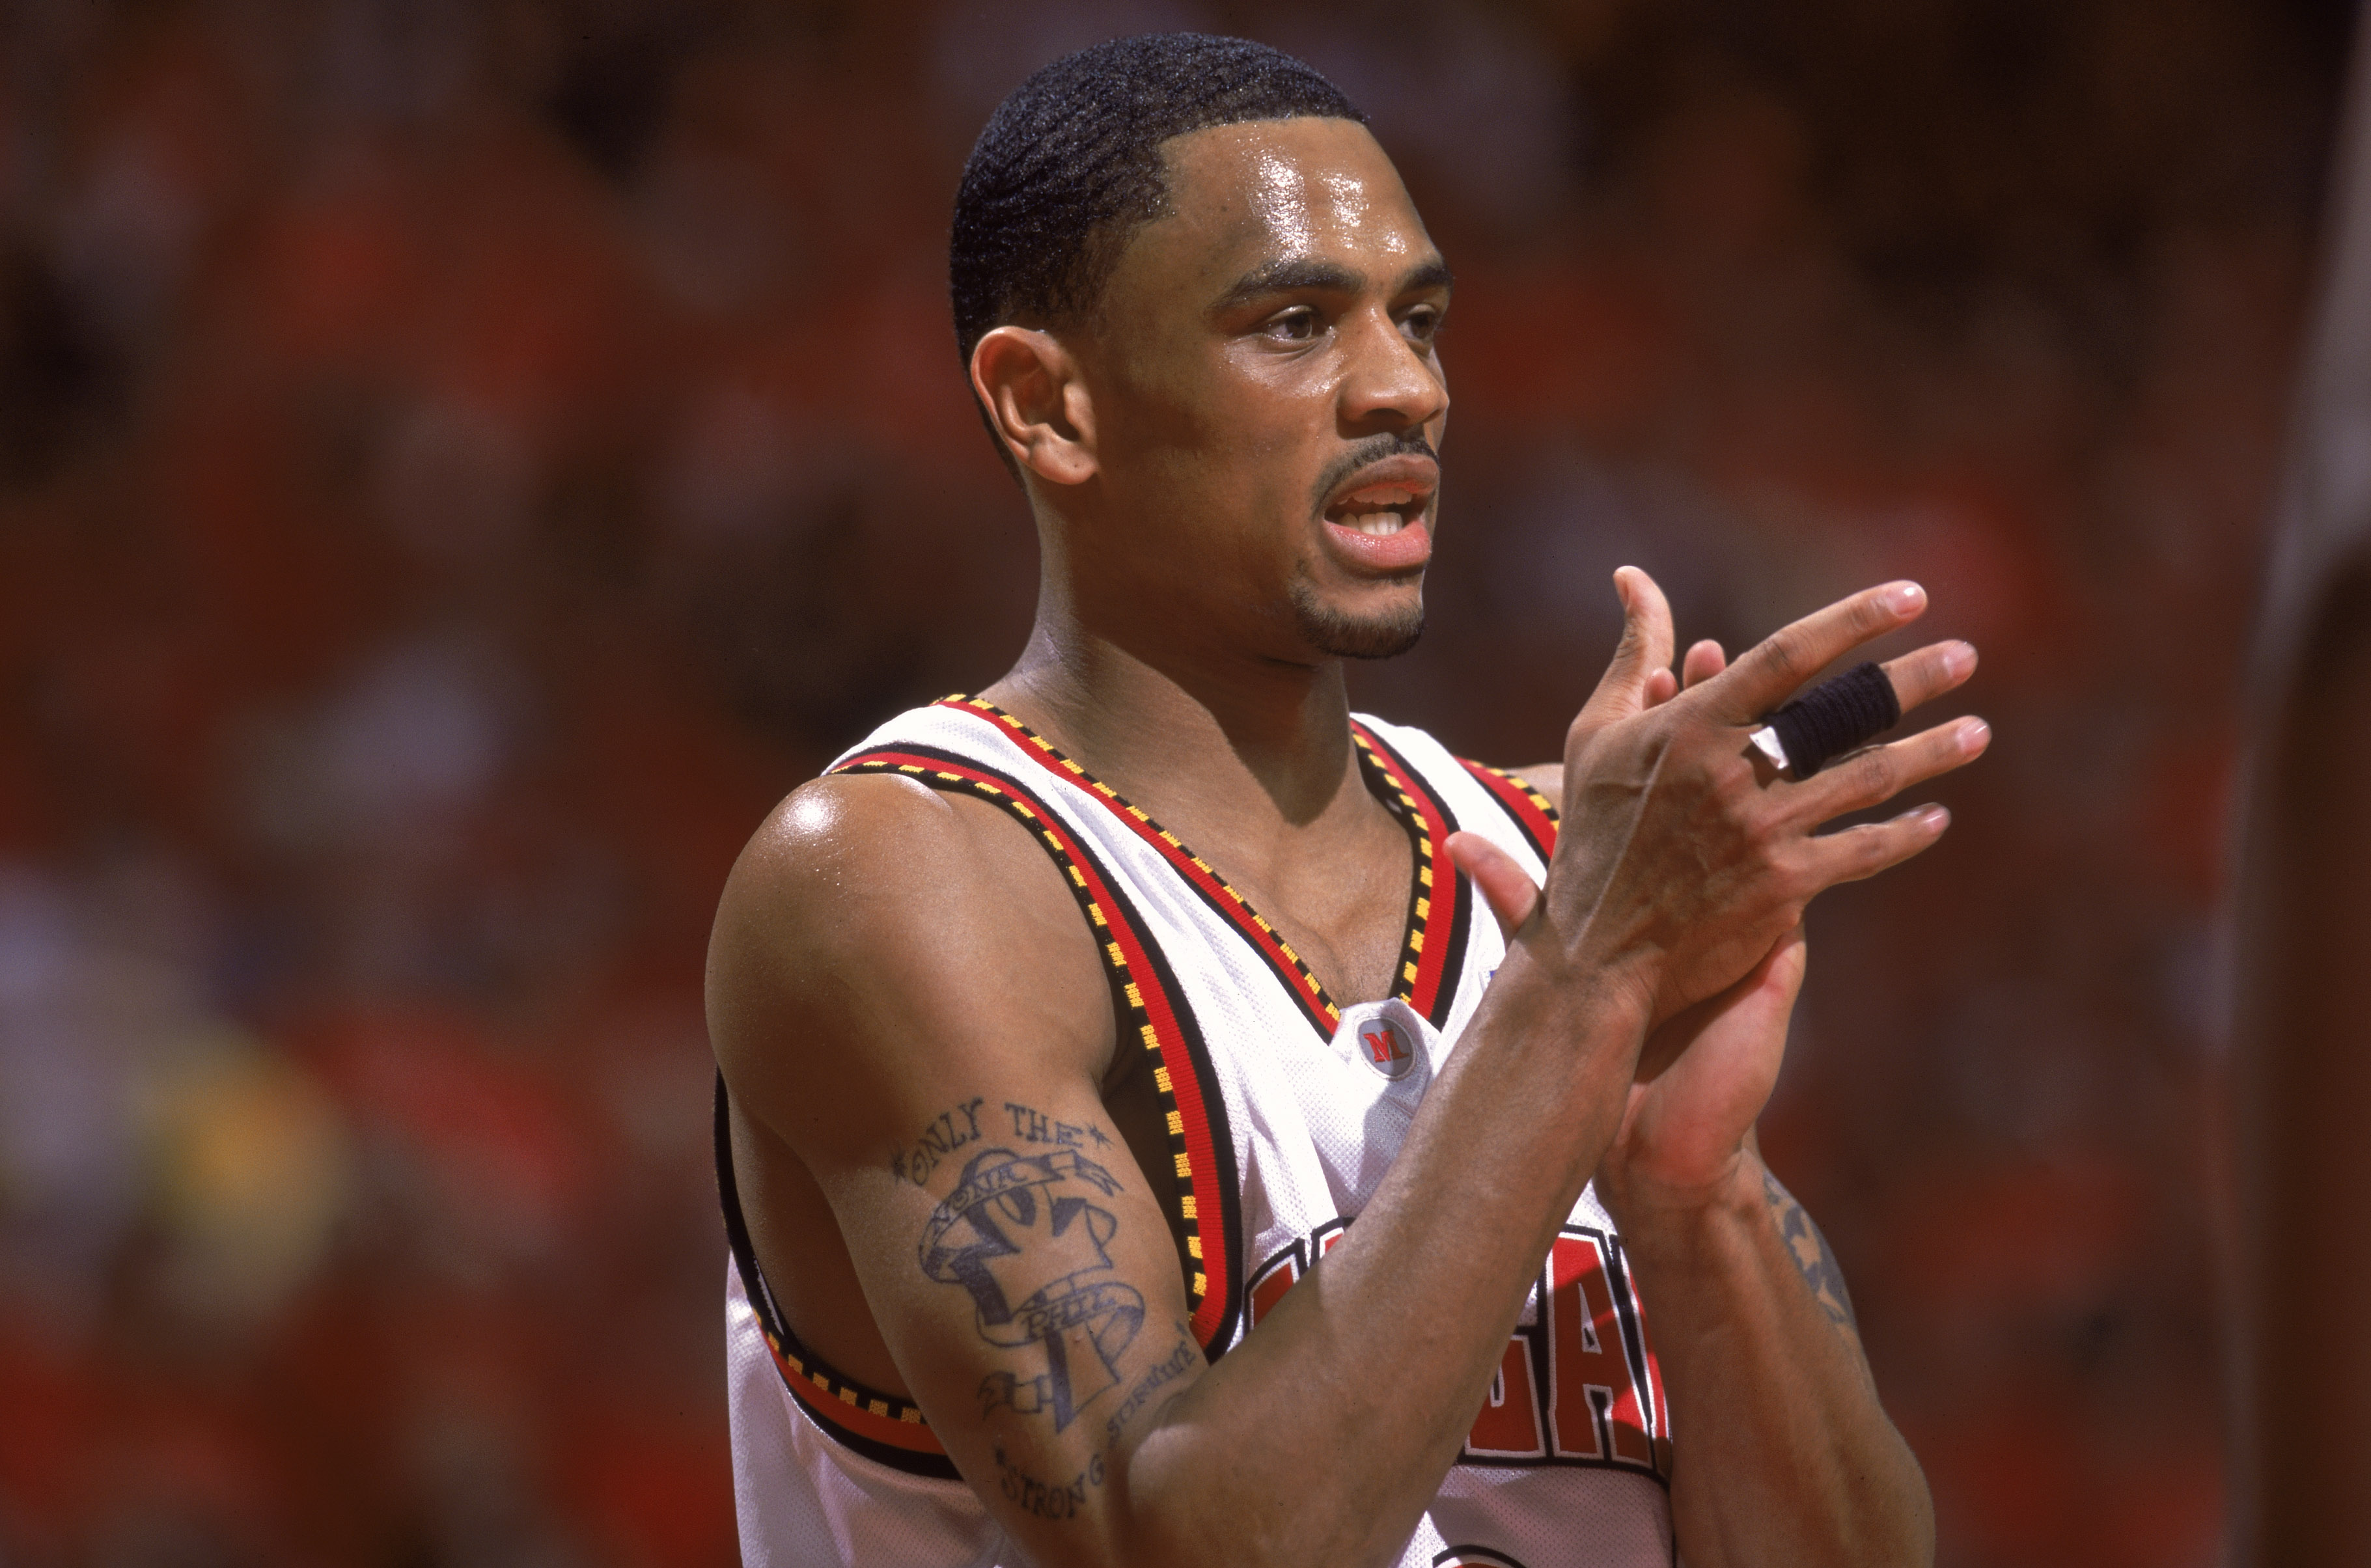 Juan Dixon of the University of Maryland Terrapins claps during a 2002 game